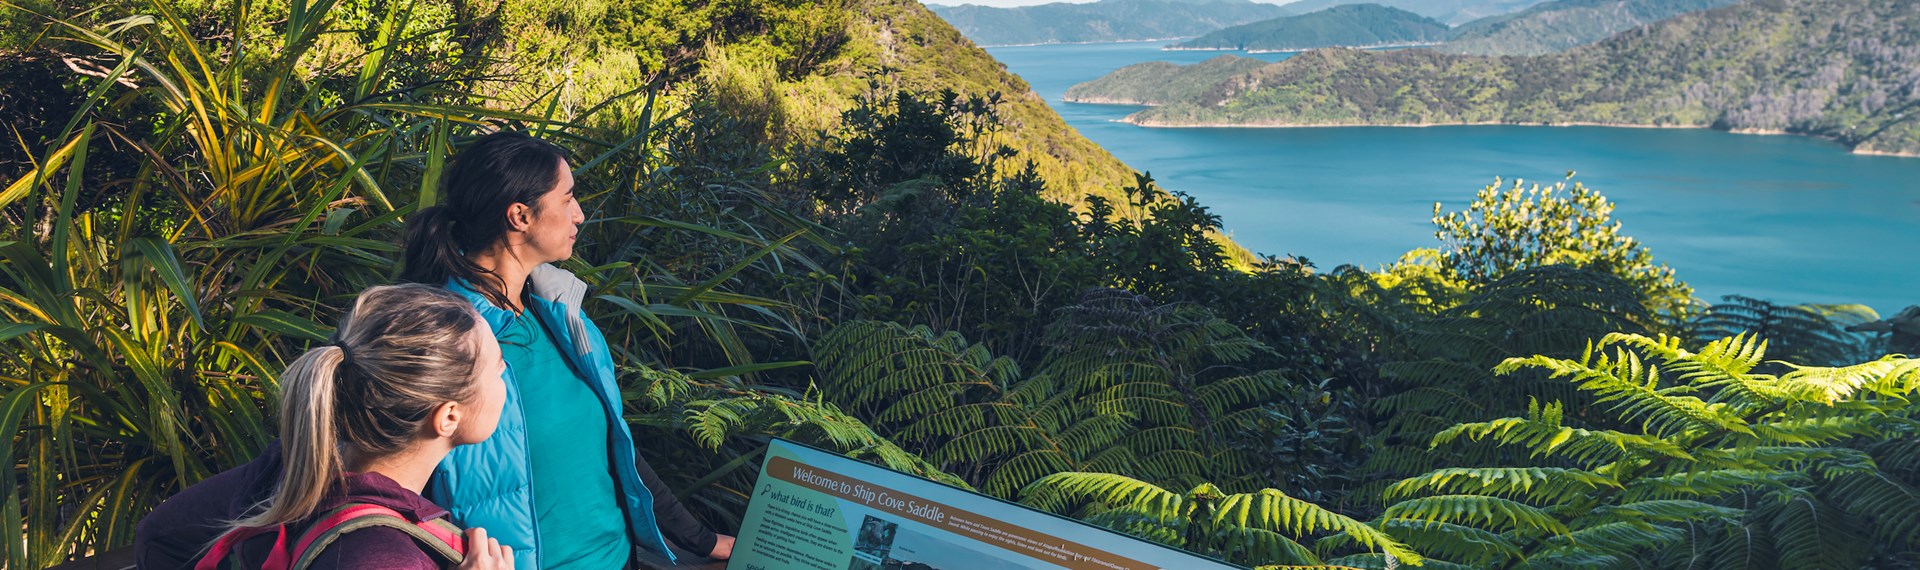 Two women admire the view over Ship Cove/Meretoto and read an interpretive sign in the outer Queen Charlotte Sound/Tōtaranui, Marlborough Sounds, New Zealand.